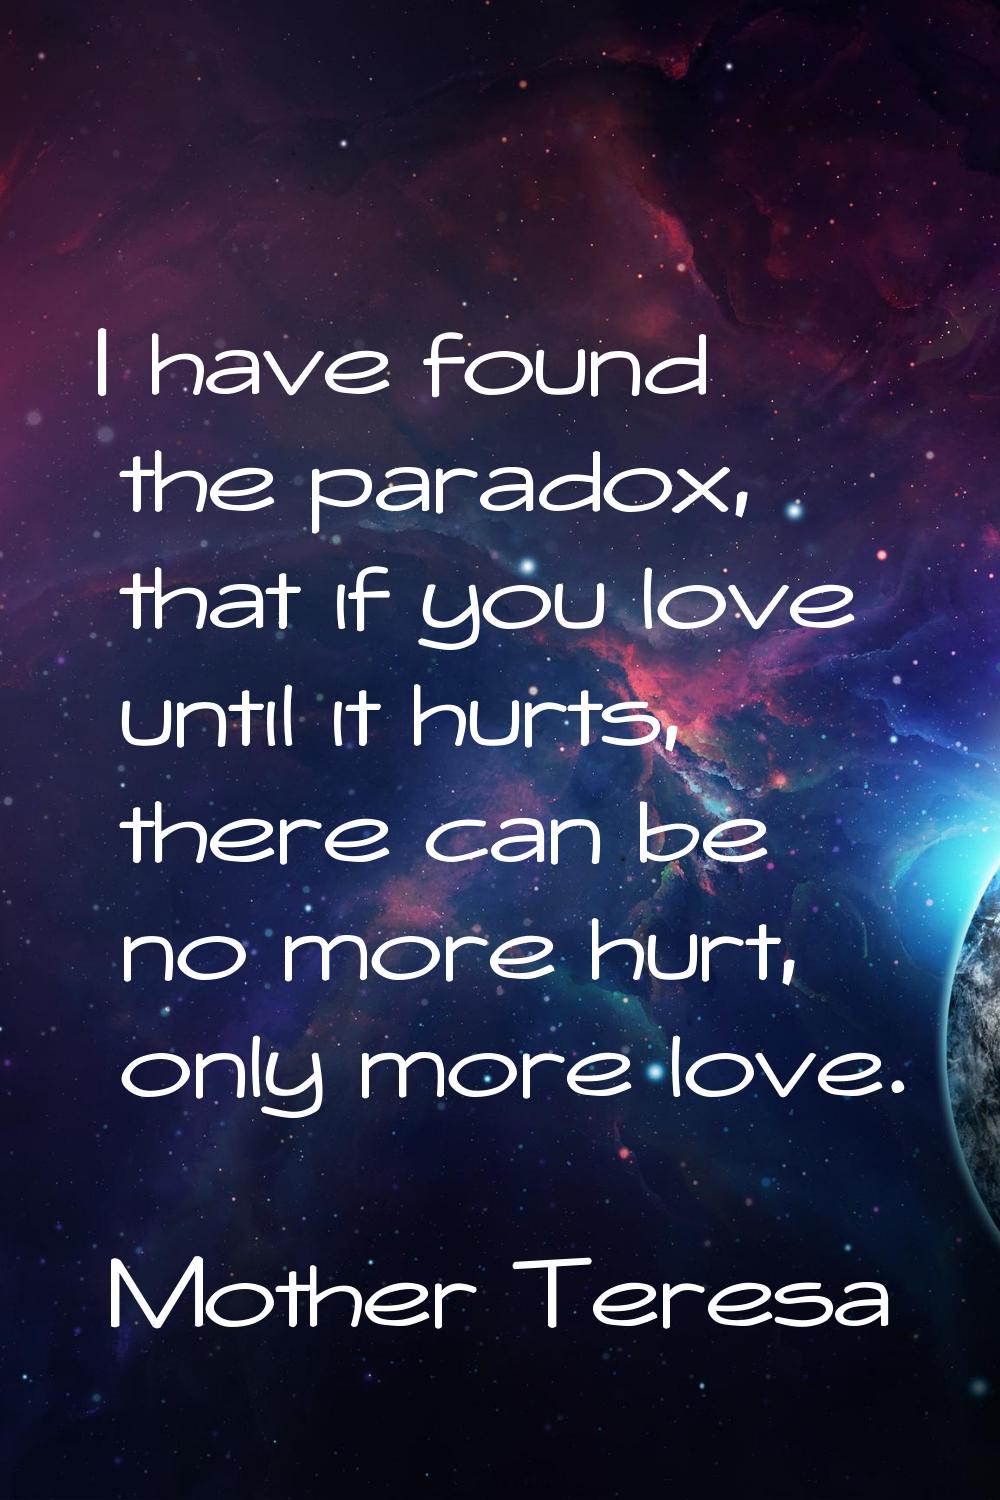 I have found the paradox, that if you love until it hurts, there can be no more hurt, only more lov